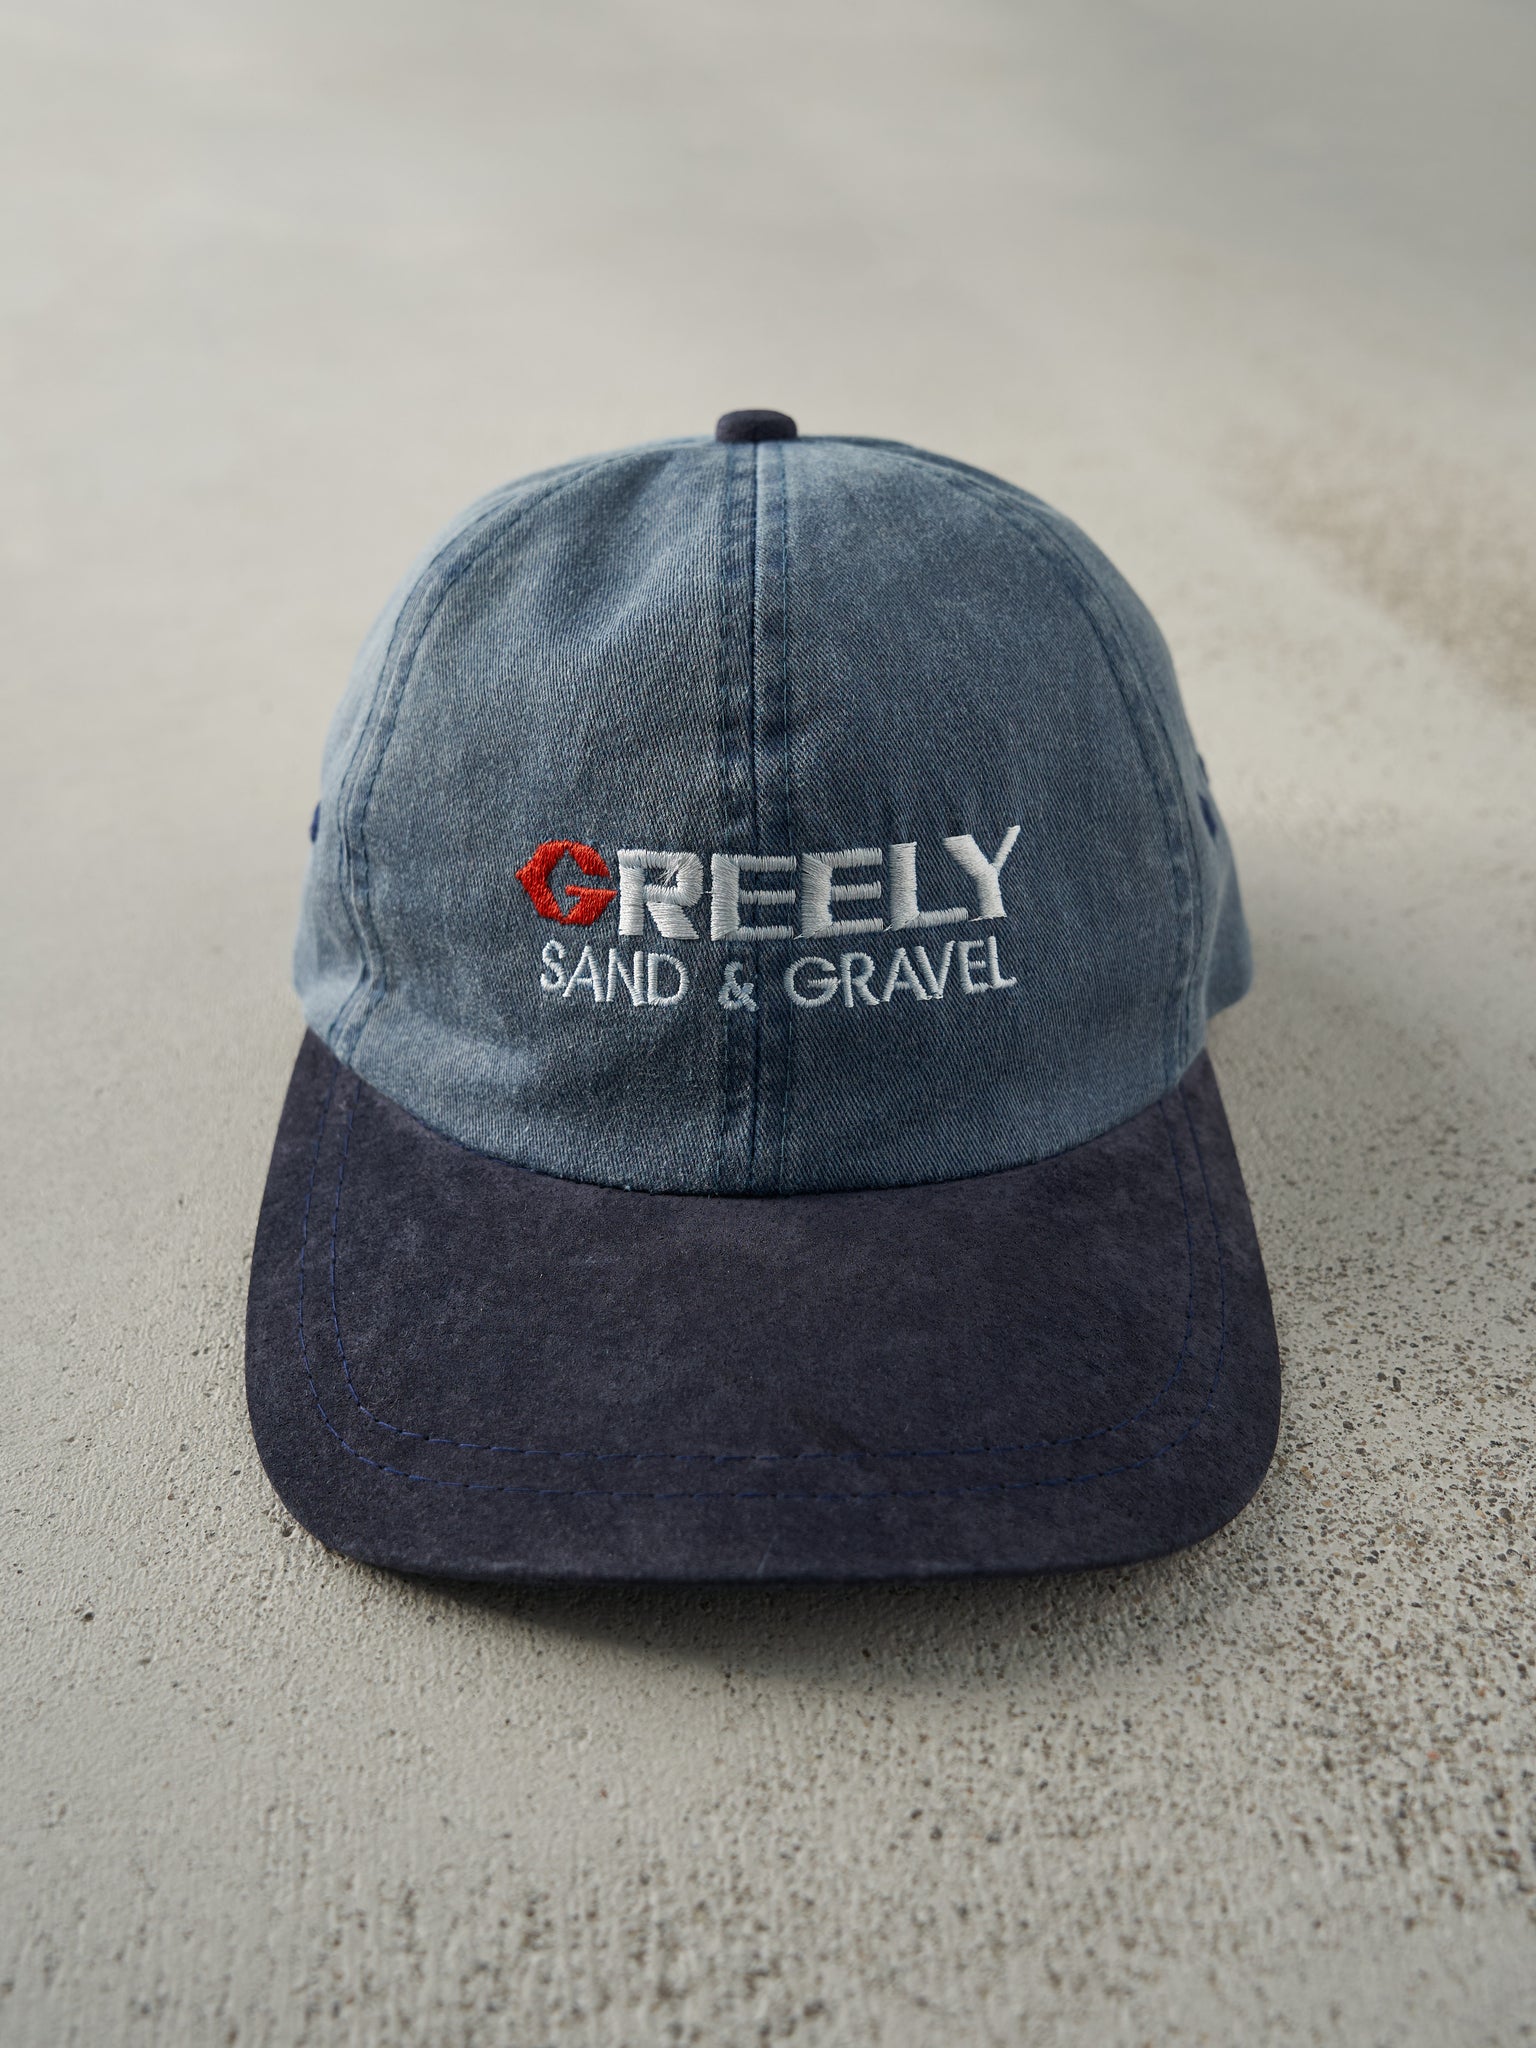 Vintage 90s Blue Two Tone & Suede Embroidered Greely Logo Strap Back Hat